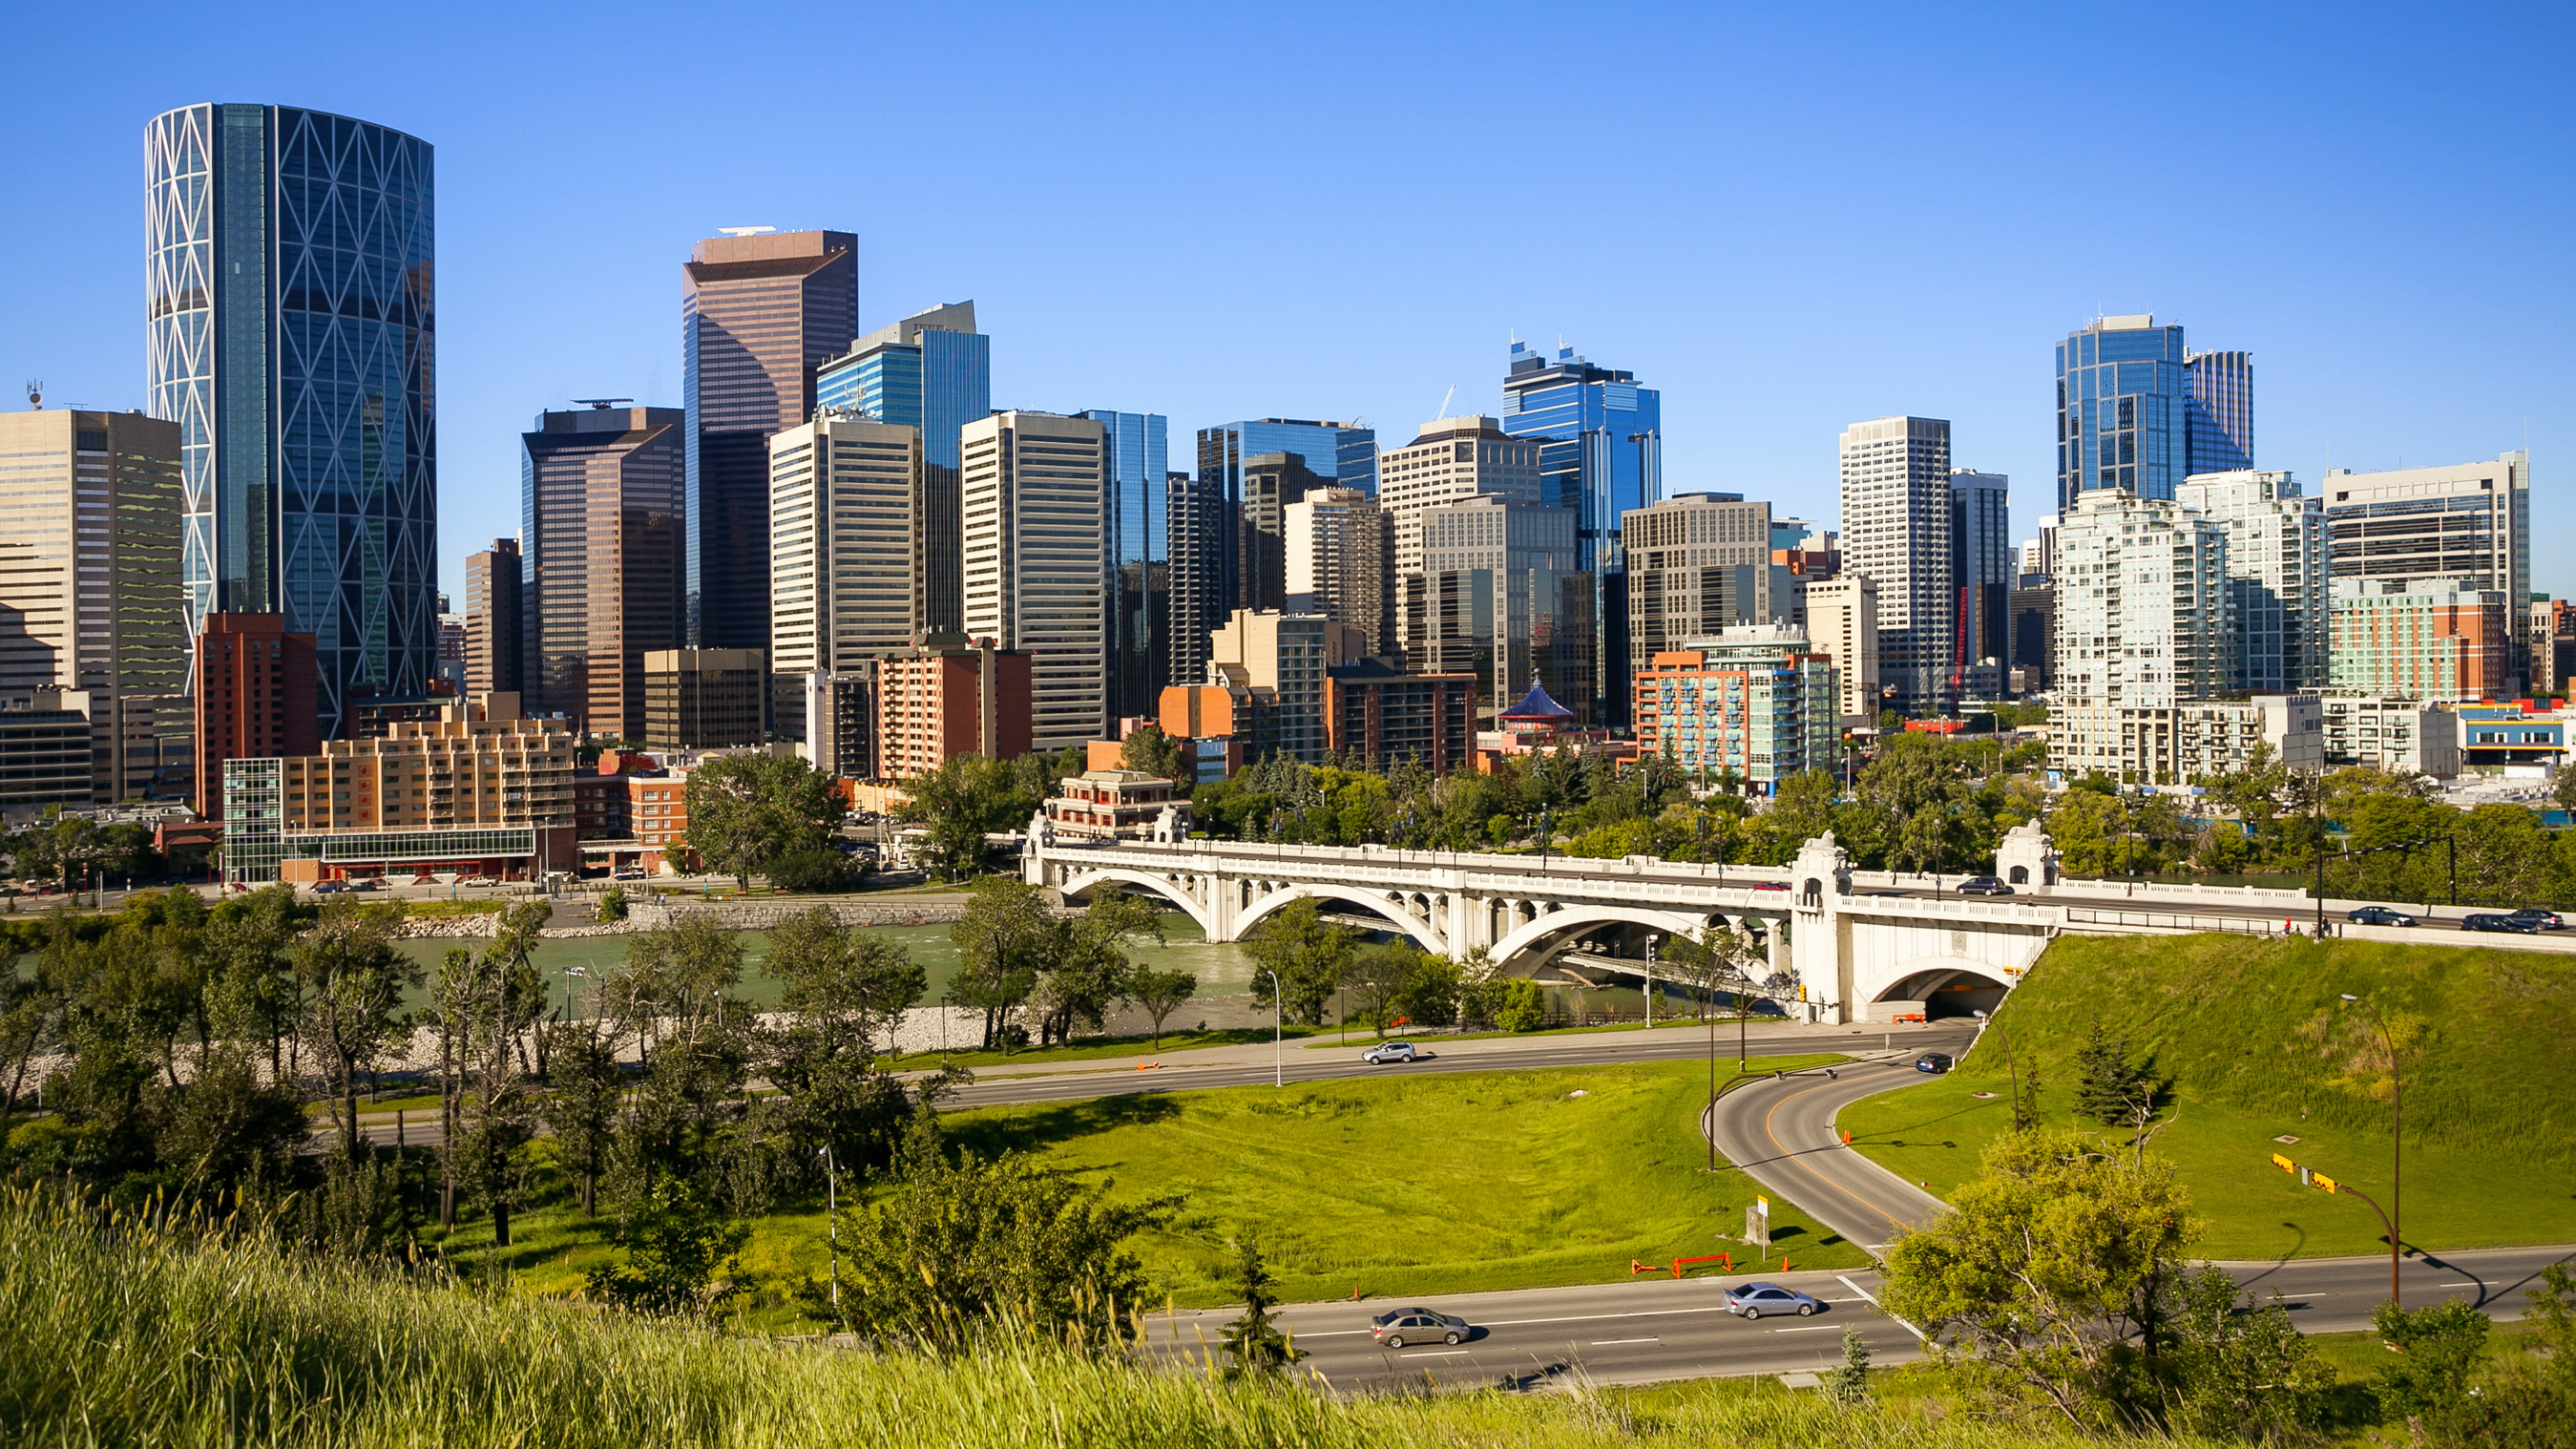 A view of the skyline in Downtown Calgary, Alberta